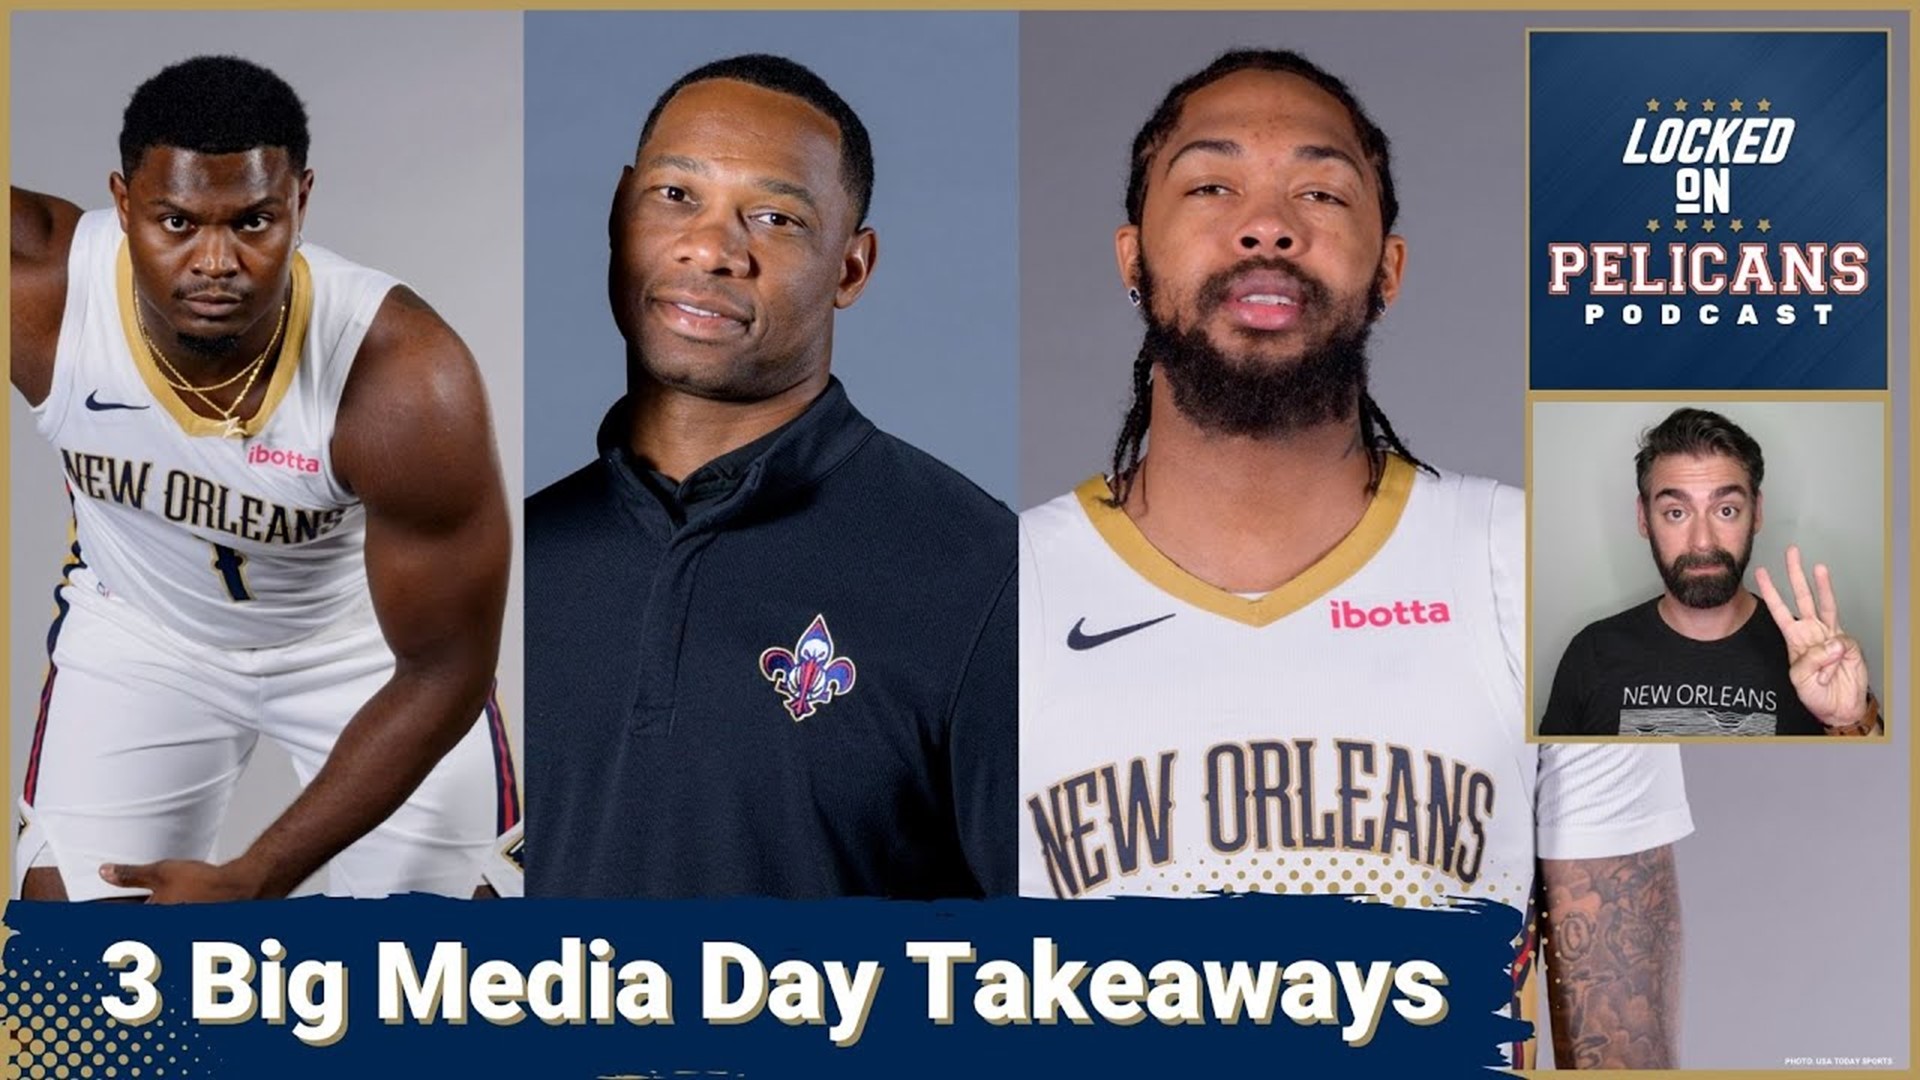 Photos: Zion Williamson and the Pelicans media day, Photos